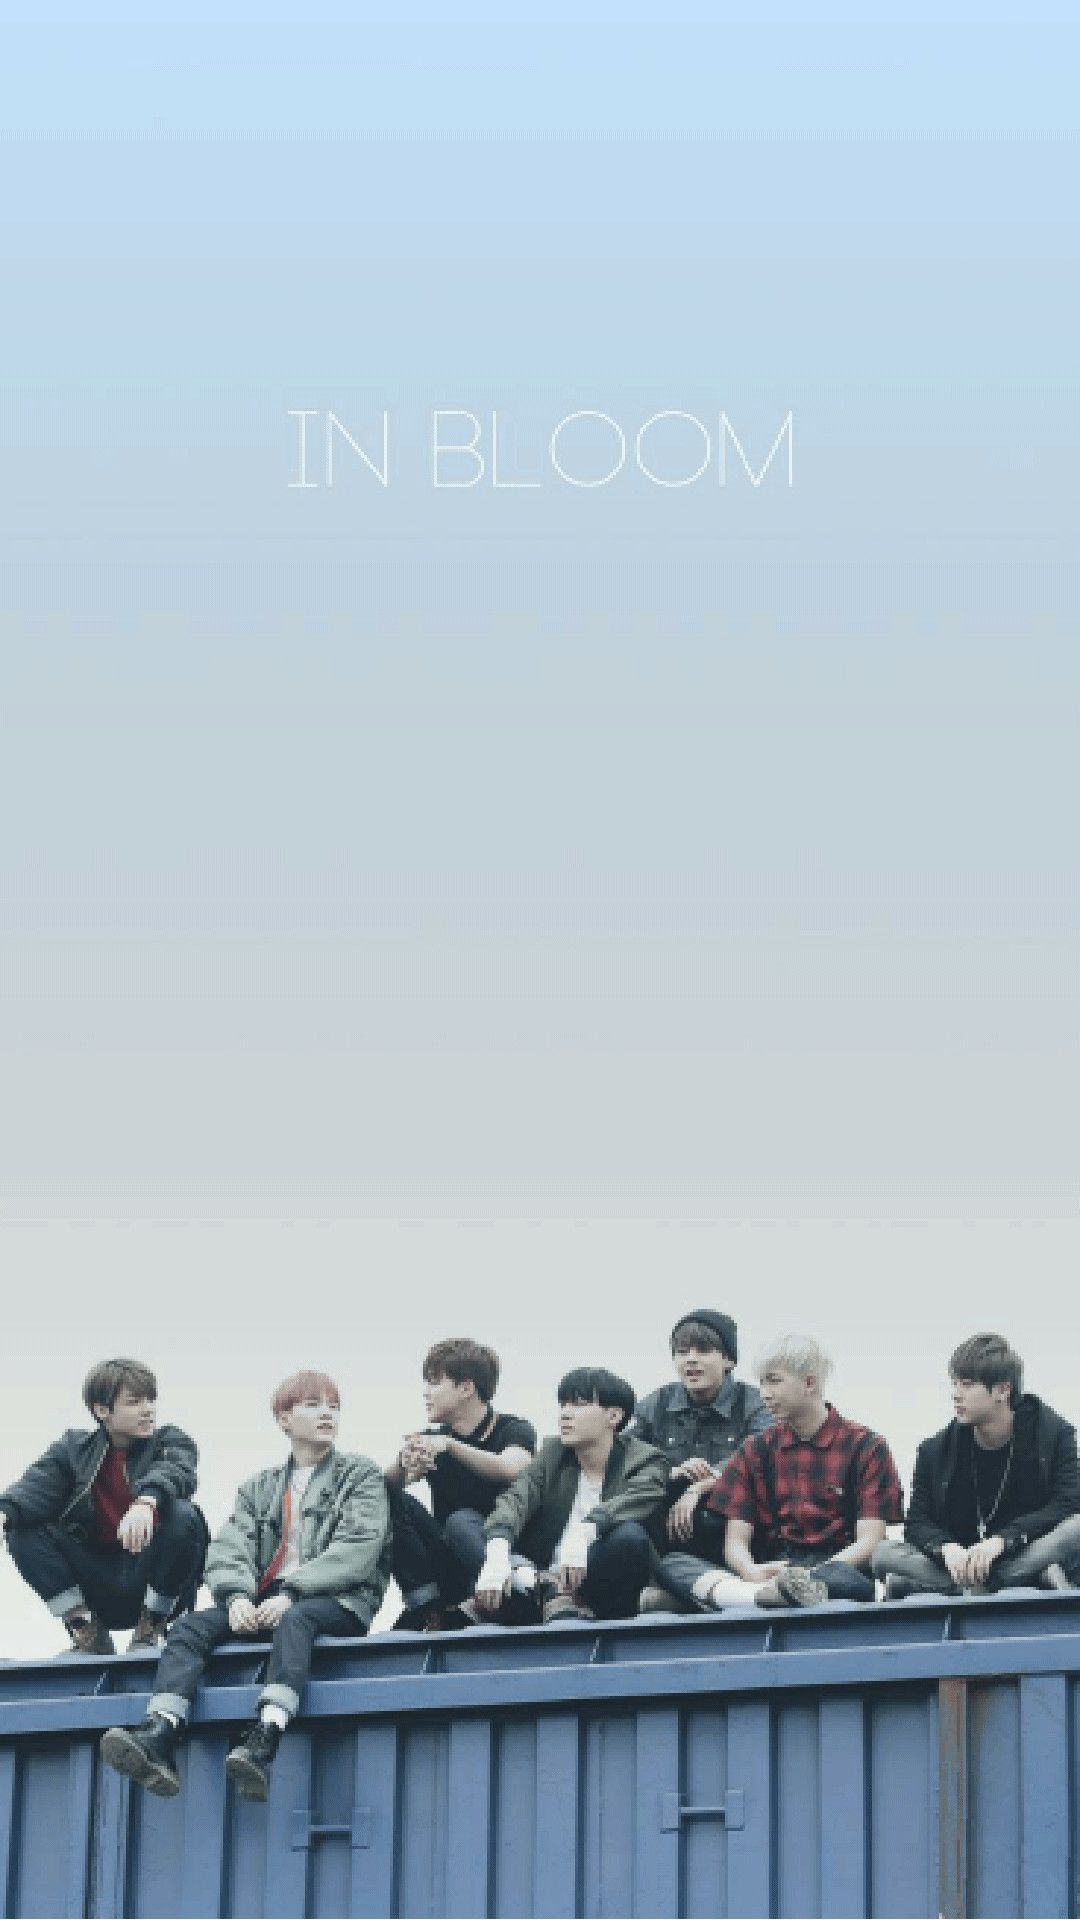 You Never Walk Alone Bts Wallpapers On Wallpaperdog